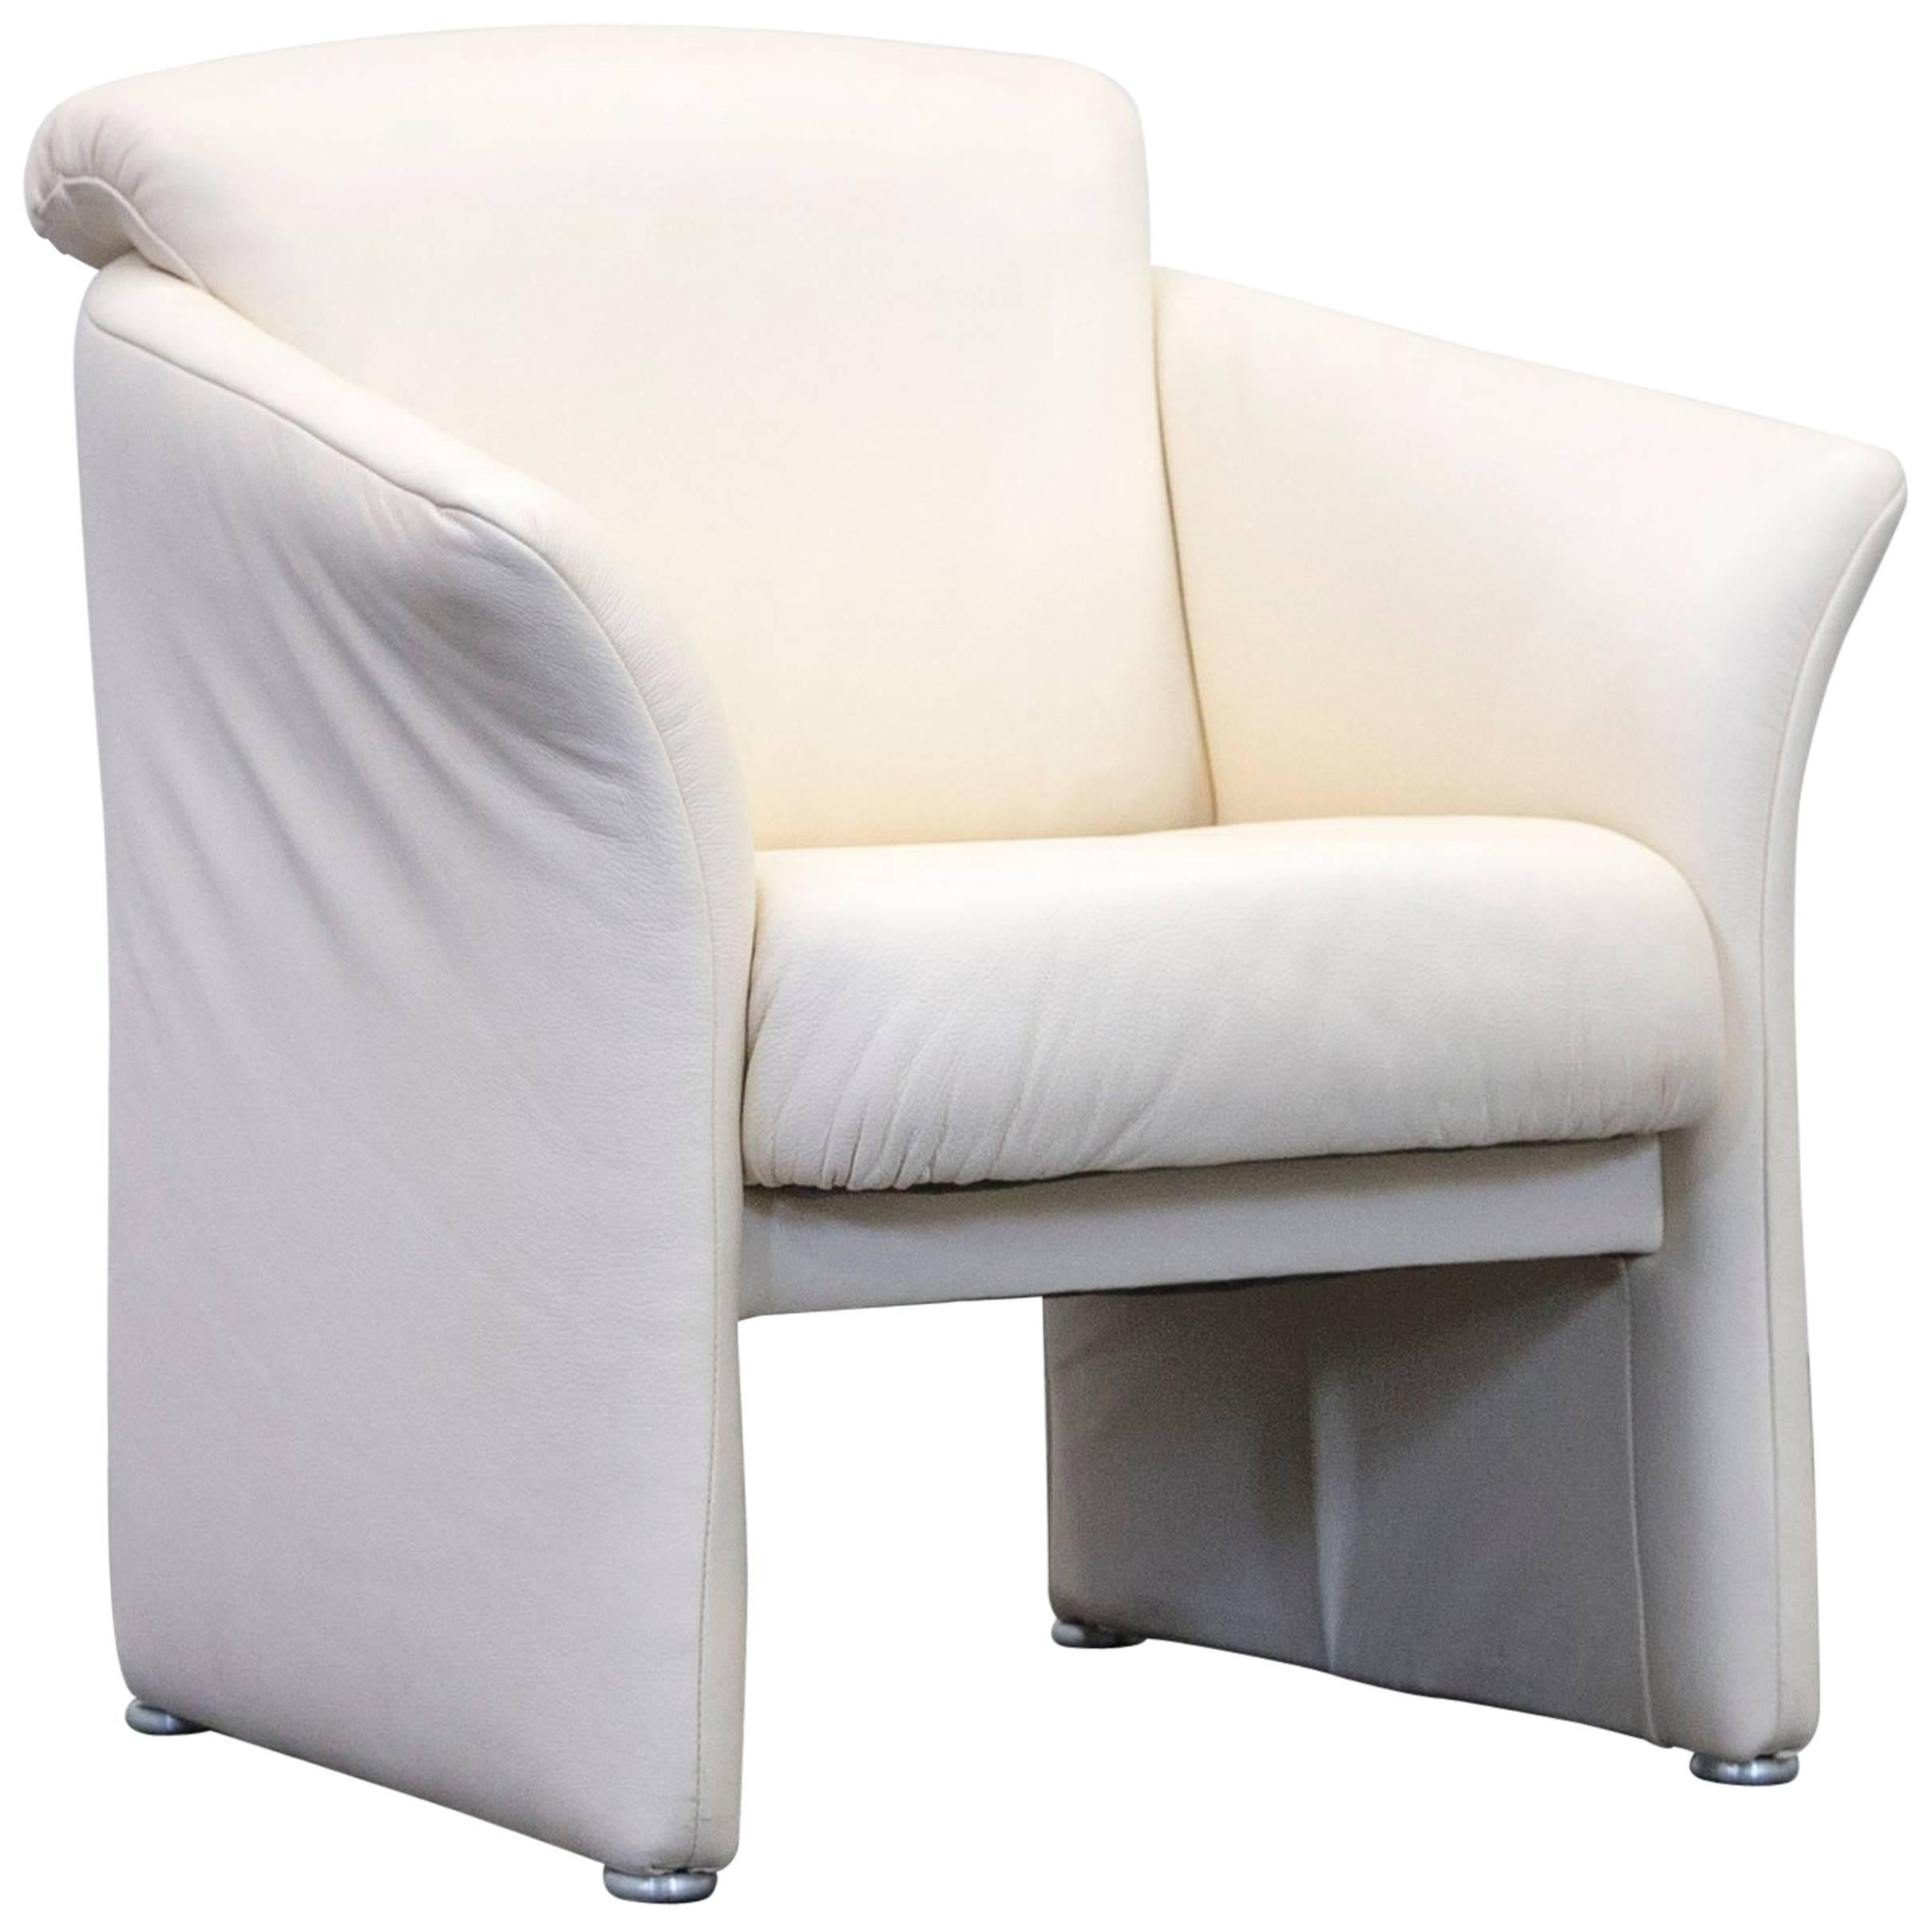 Designer Armchair Leather Crème One Seat Couch Modern